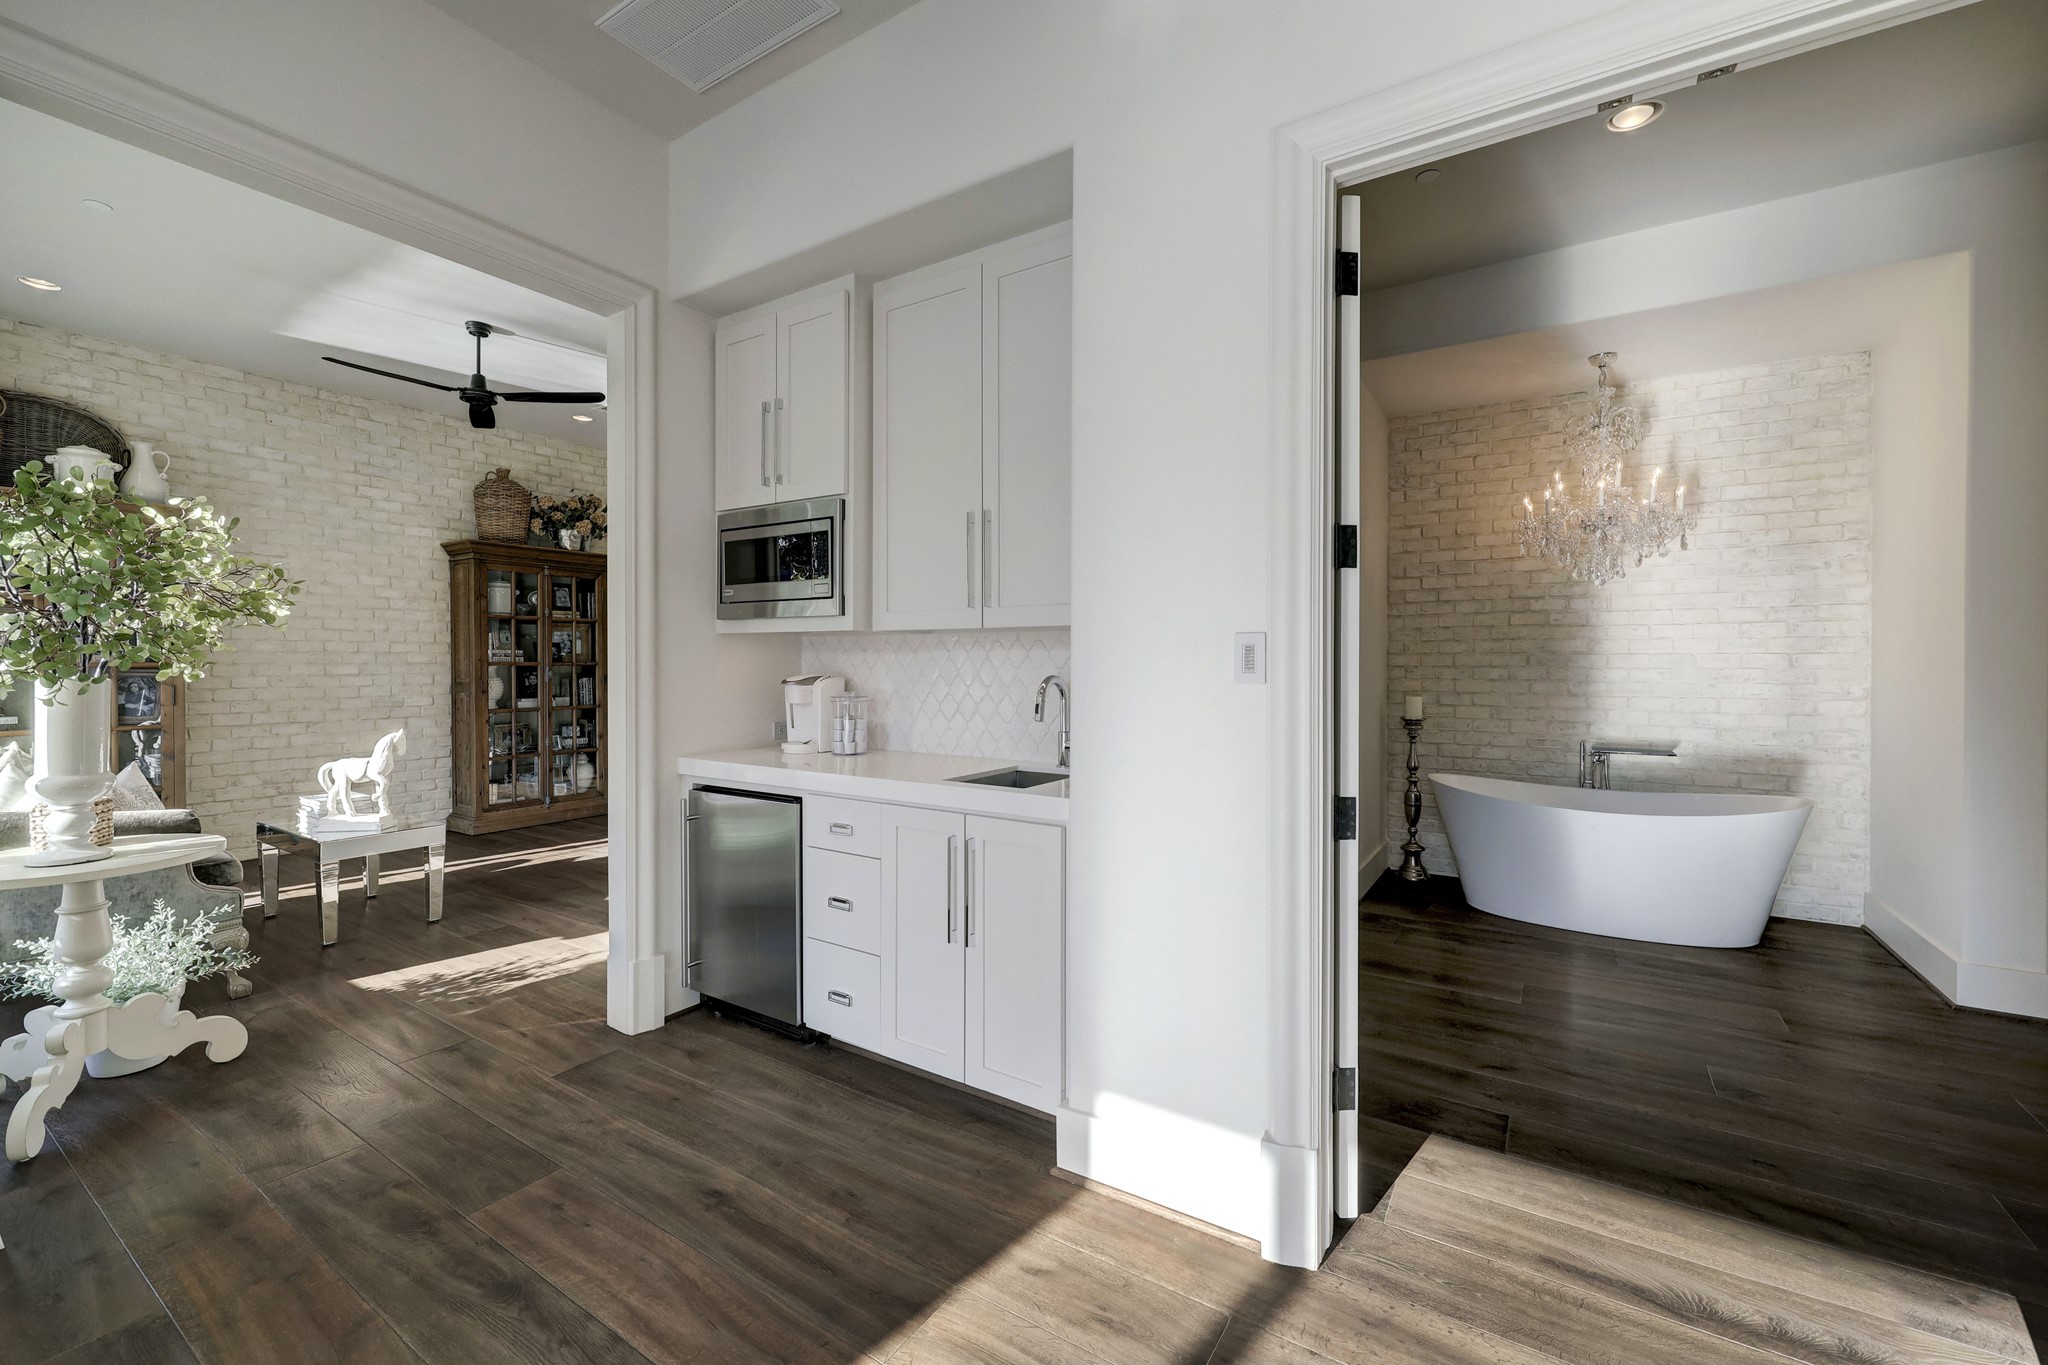 A vestibule to the primary bedroom features a convenient wet bar with a microwave, sink, ice maker, and quartz countertops, allowing for easy mornings.